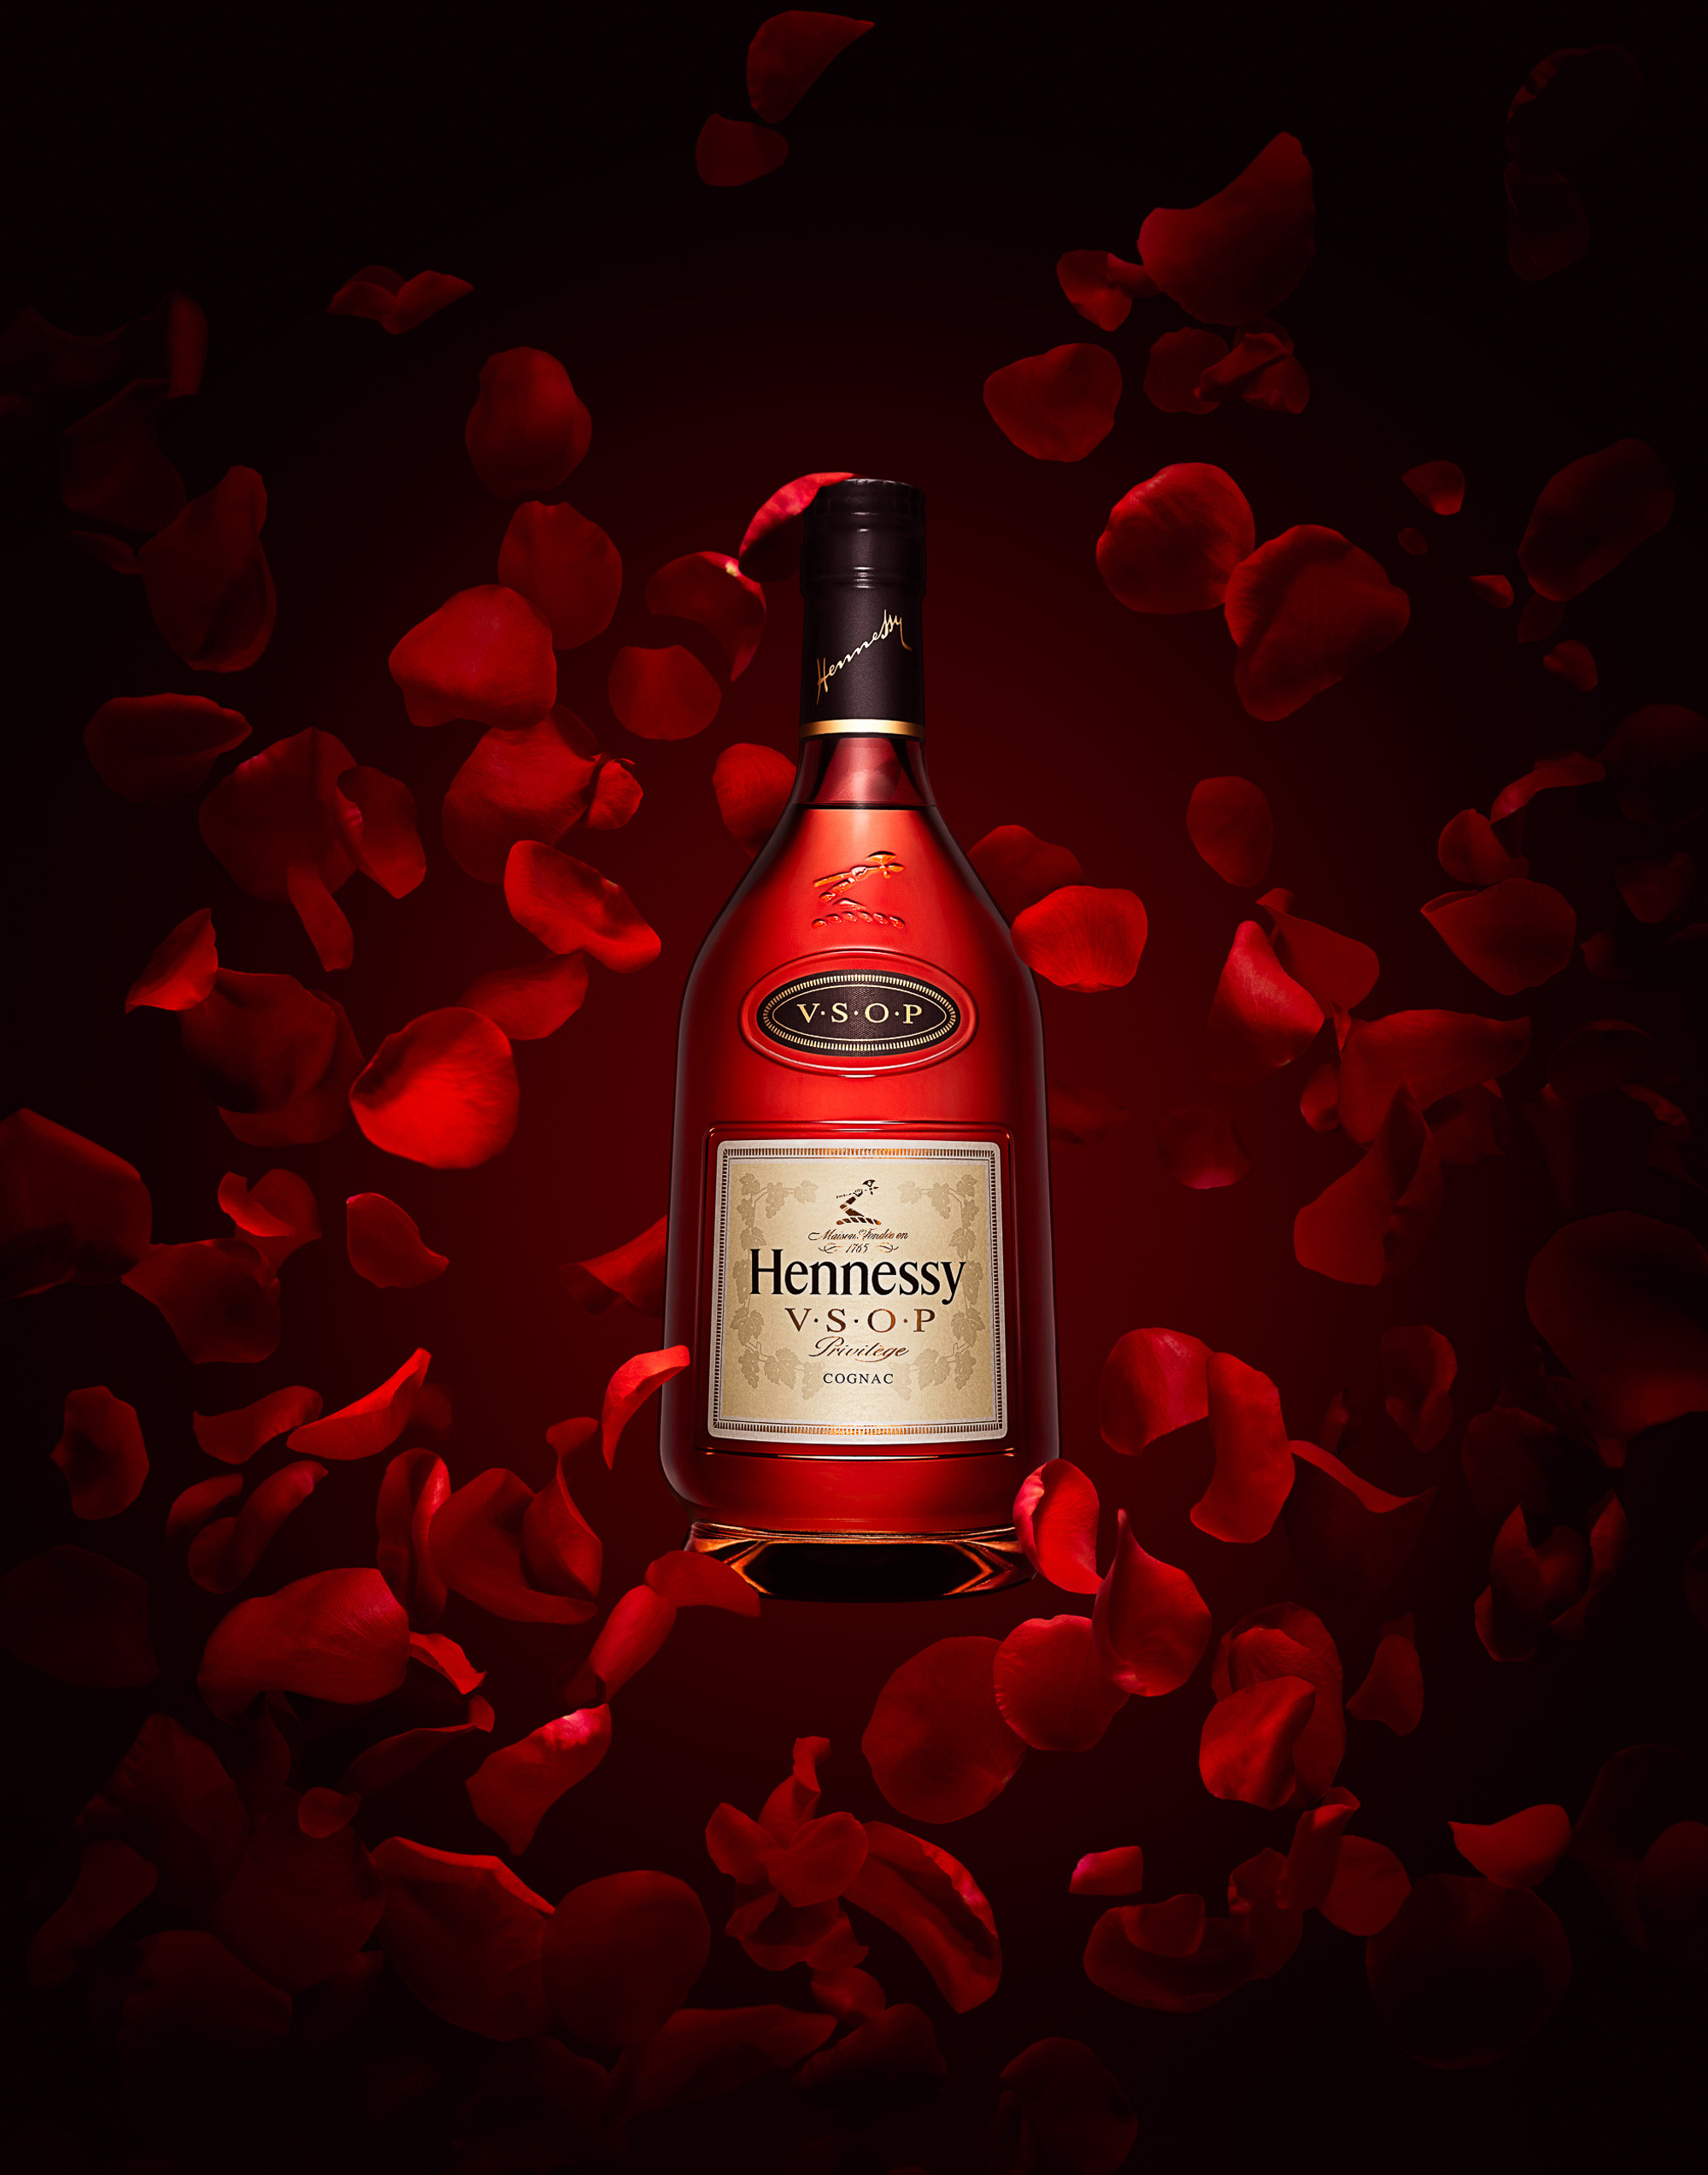 Bottle of Hennessy VSOP Cognac on deep red background with floating rose petals. Beverages and alcohol product & advertising photography by Timothy Hogan Studio in Los Angeles